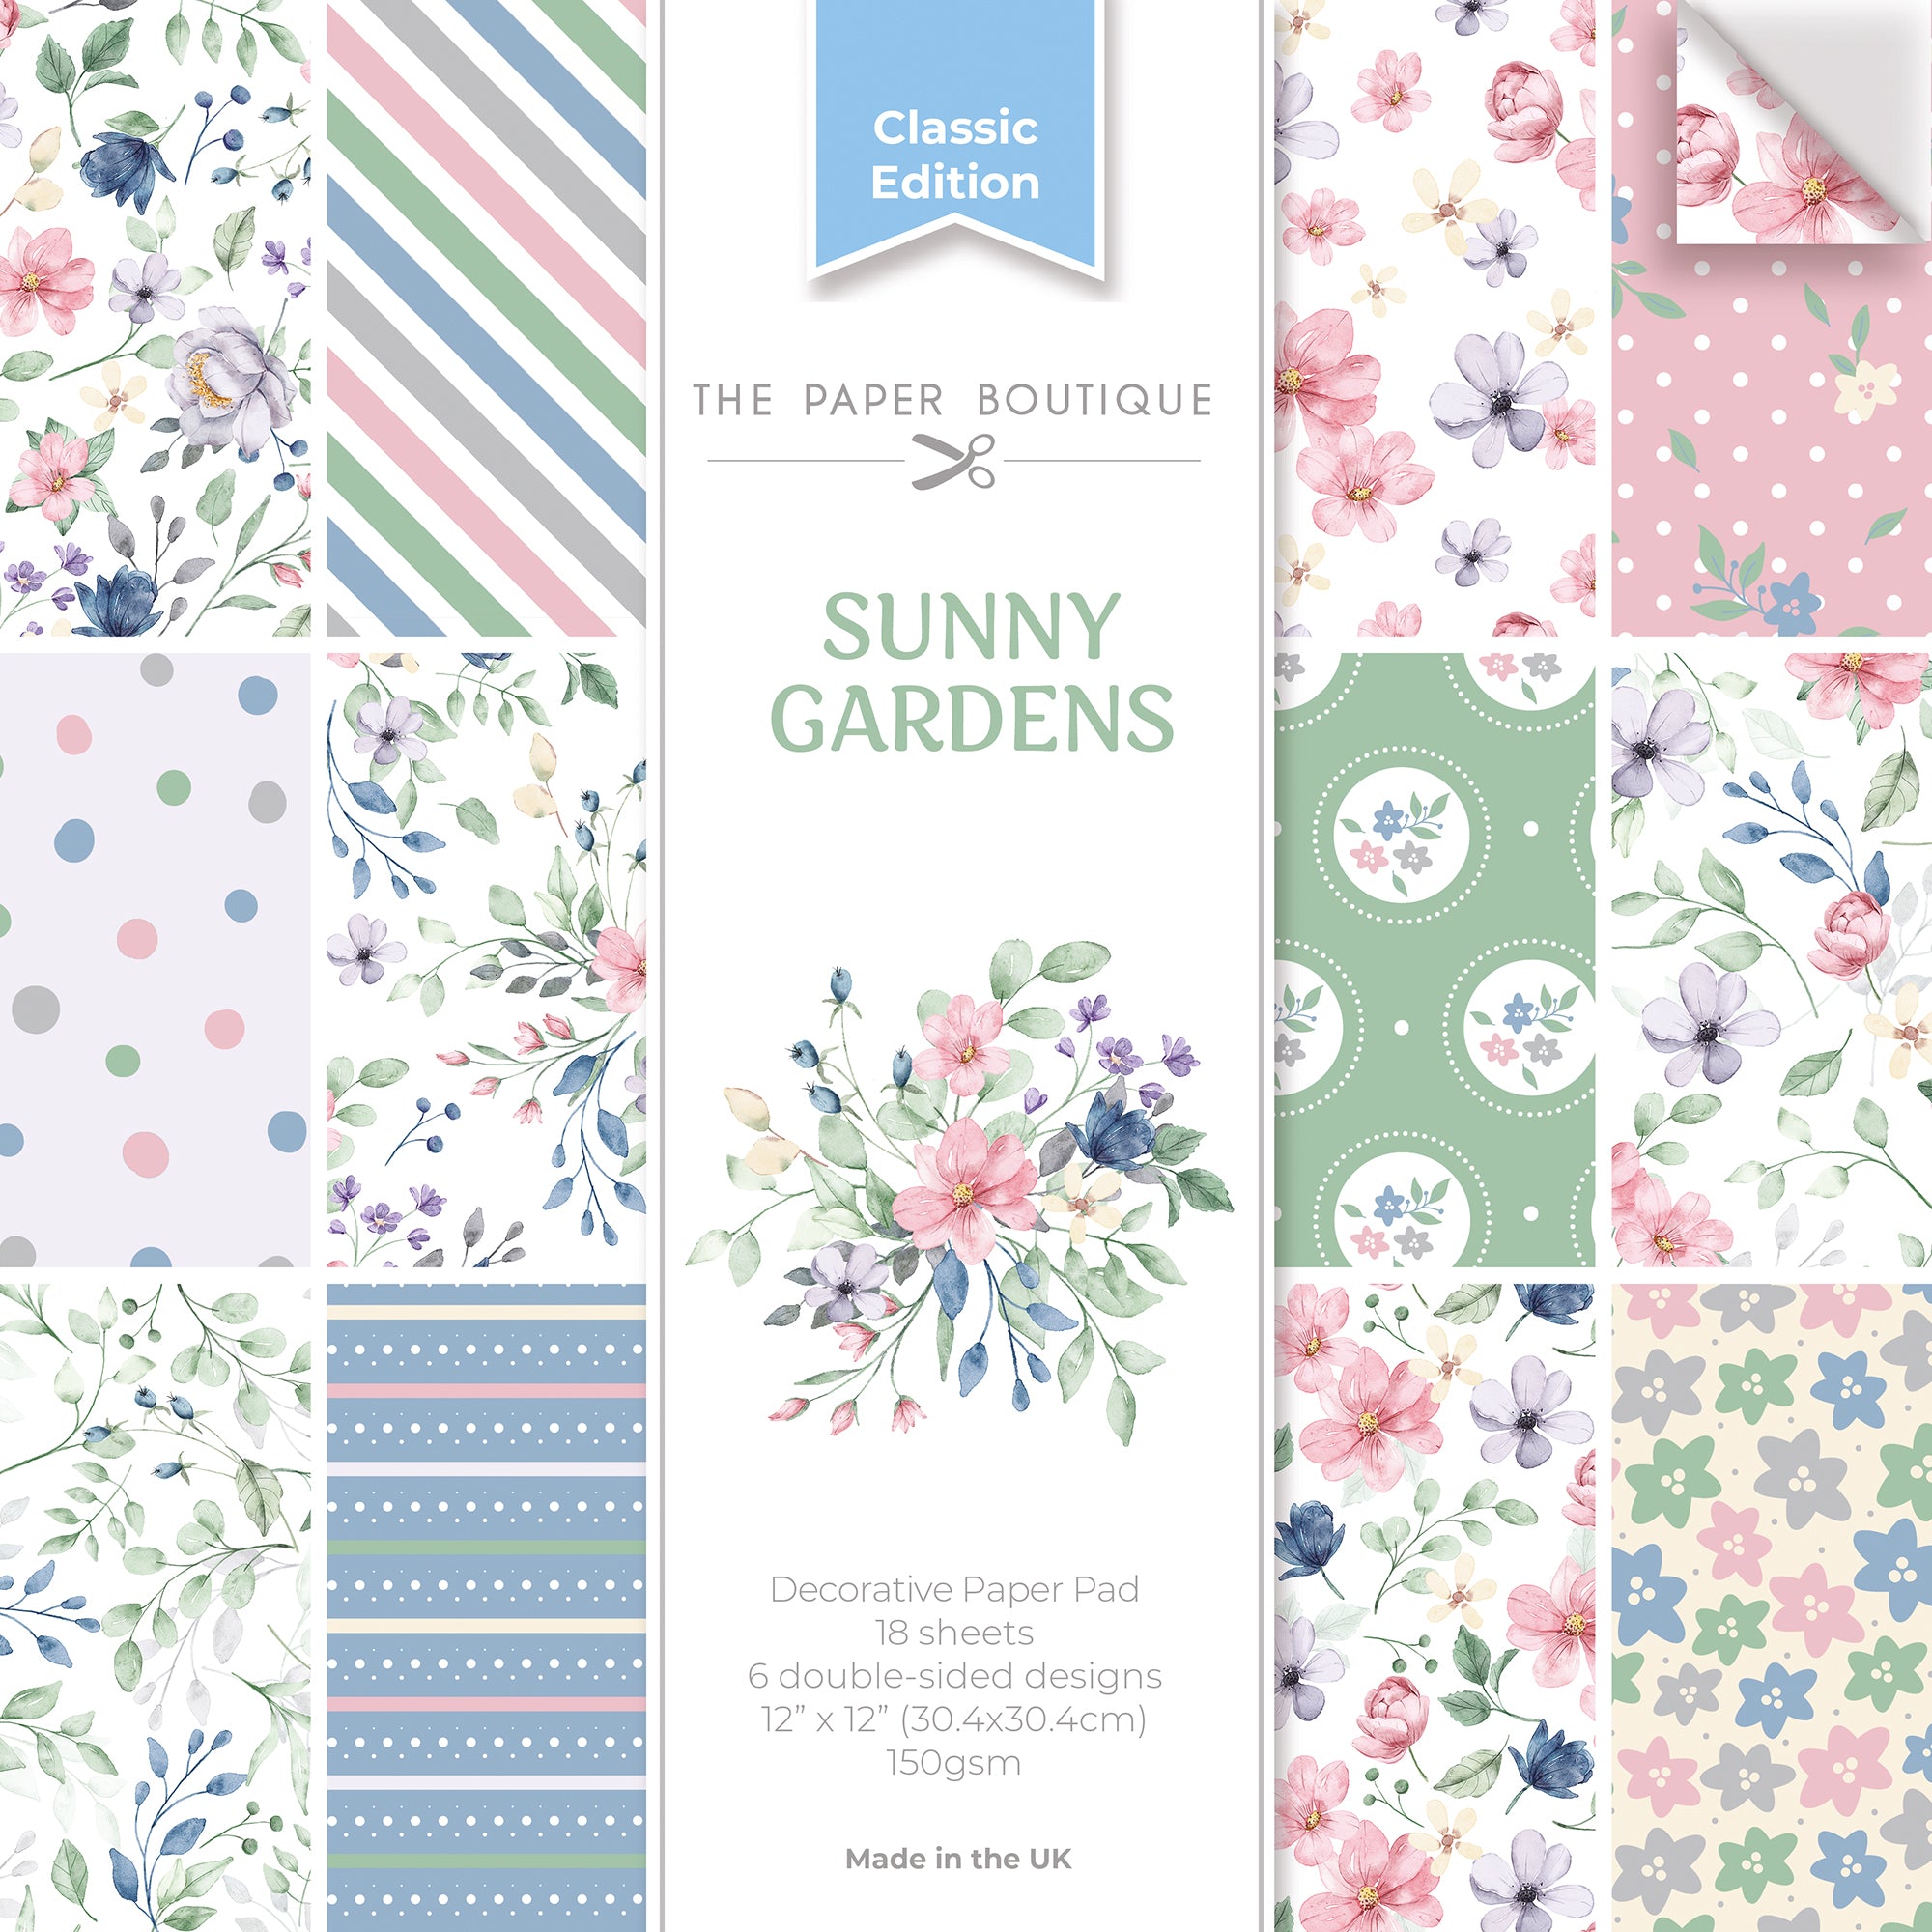 The Paper Boutique Sunny Gardens 12 in x 12 in Decorative Paper Pad